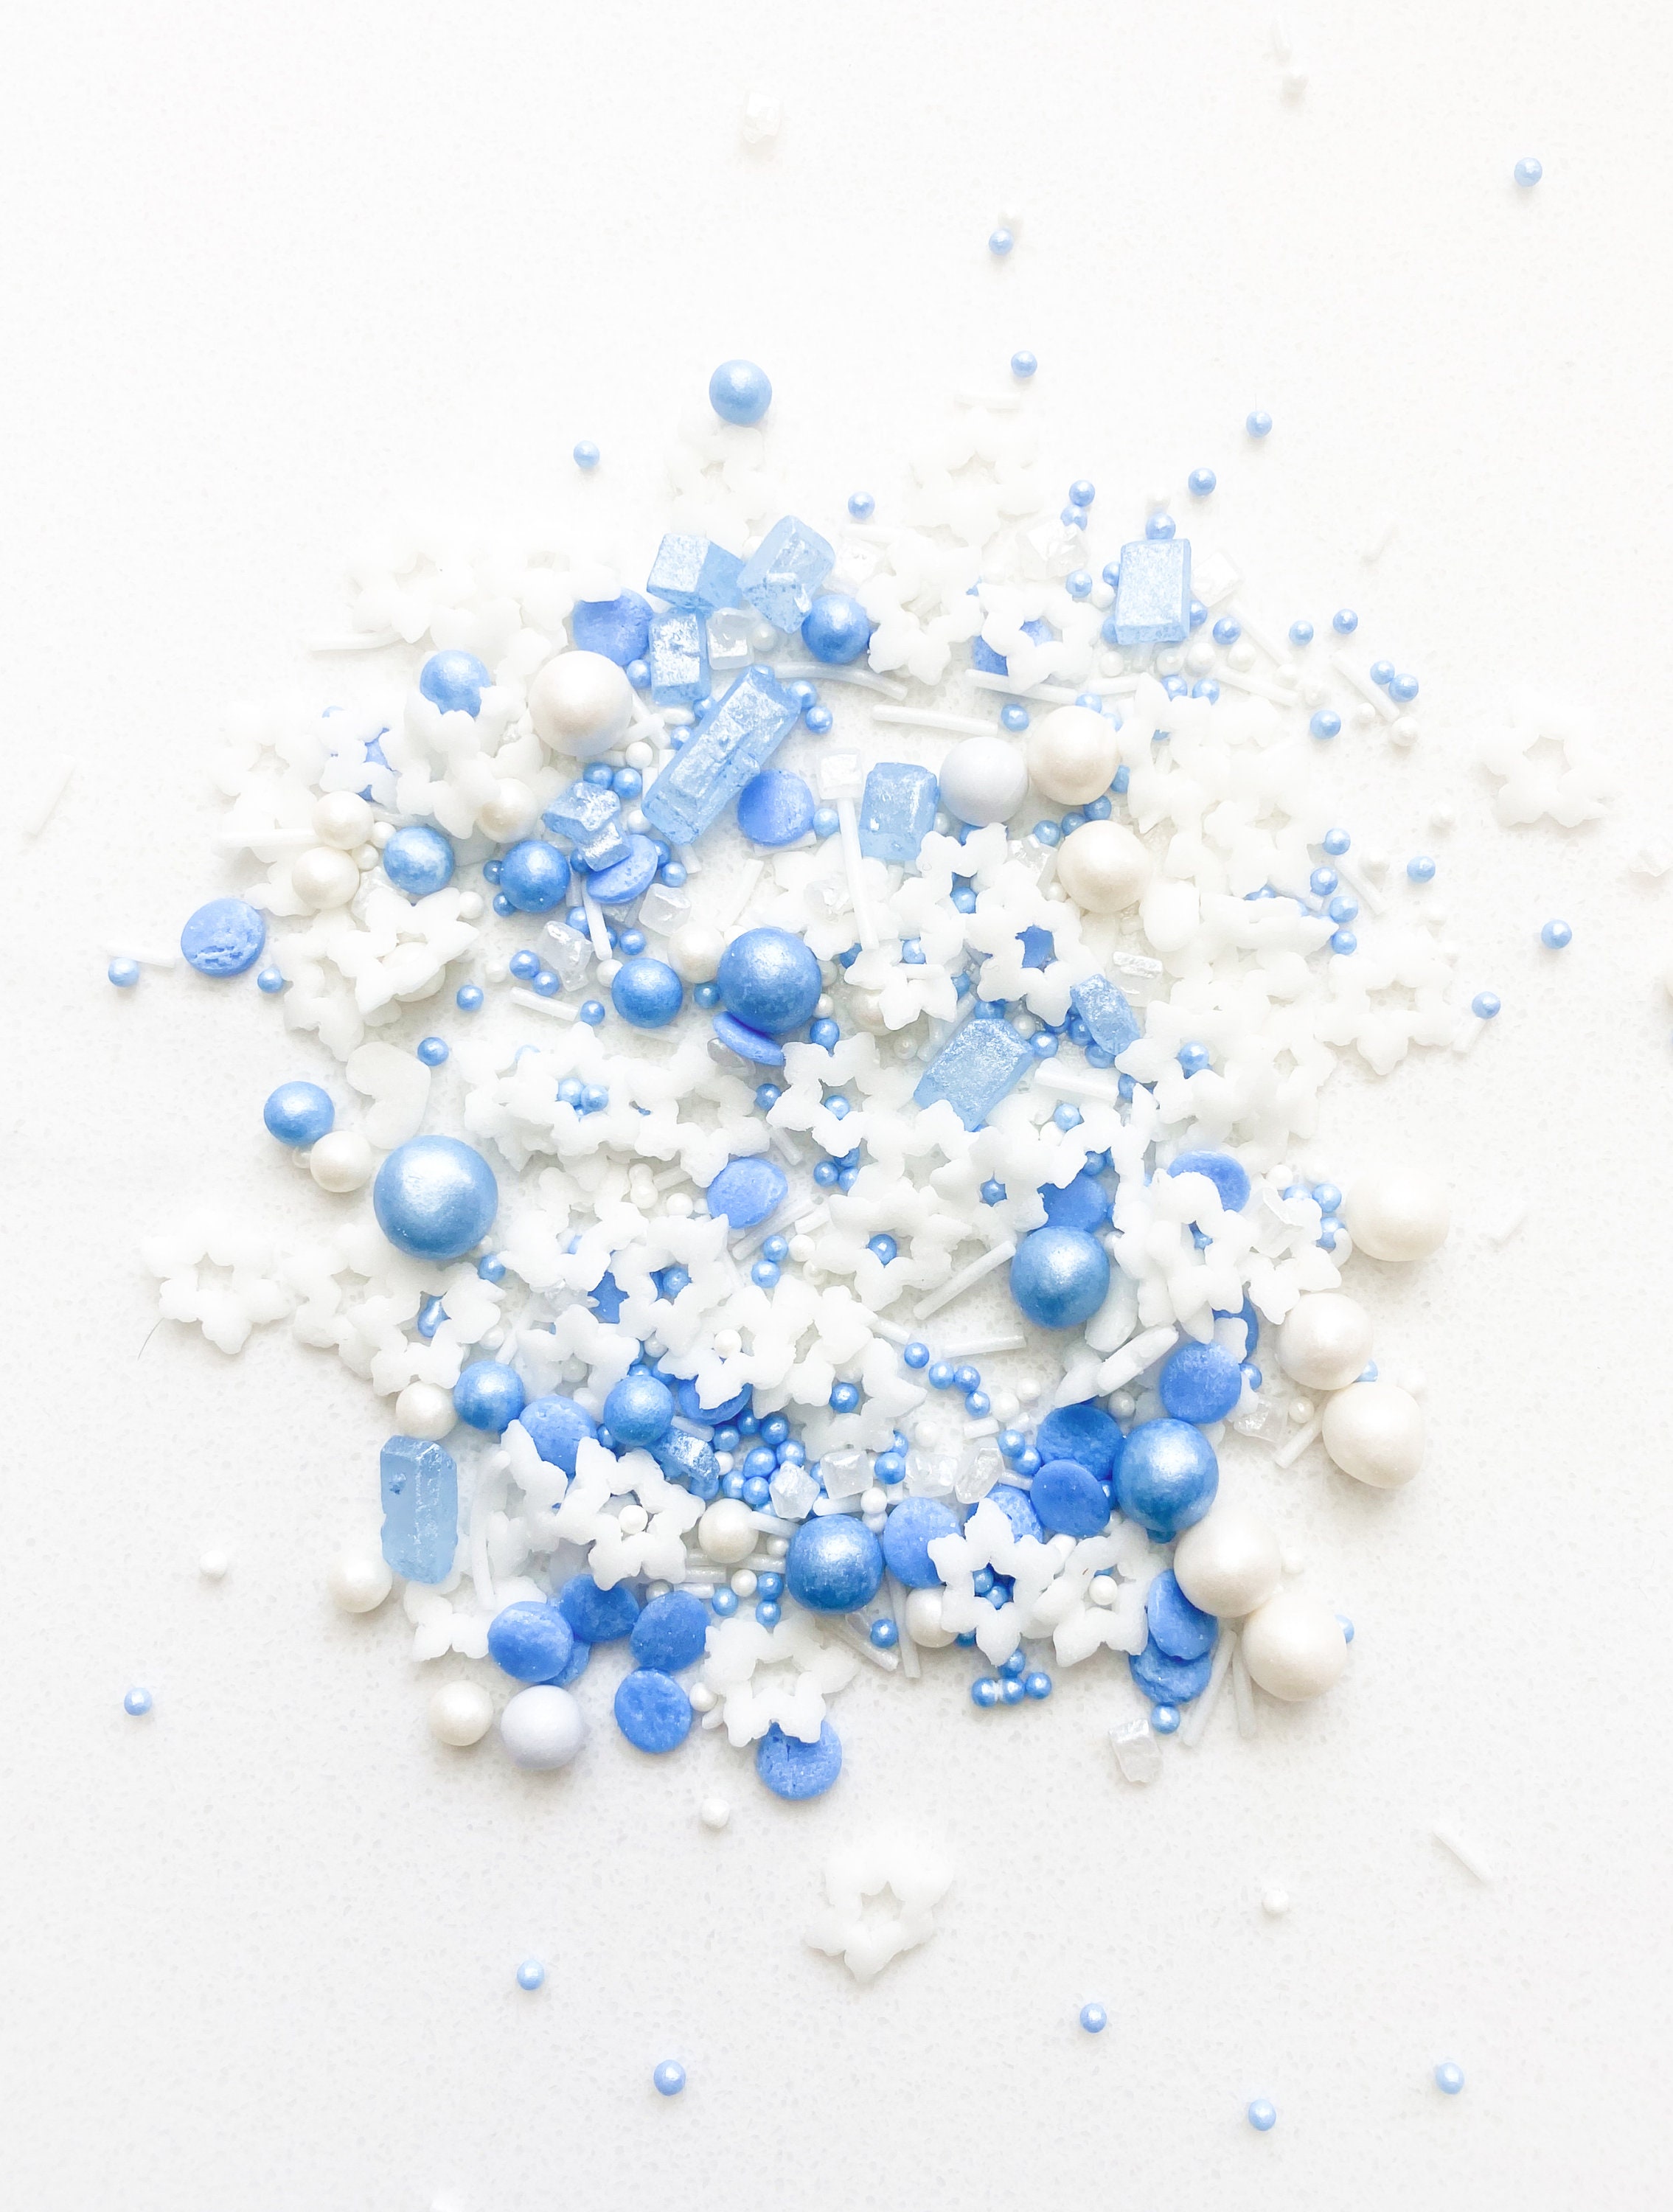 Snowflake Sprinkles, Frozen in Sugar Sprinkle Mix, Blue Sprinkles, Baking  Cake Cupcake Toppers, Cookie Decorating, Ice Cream Decorations Celebrations